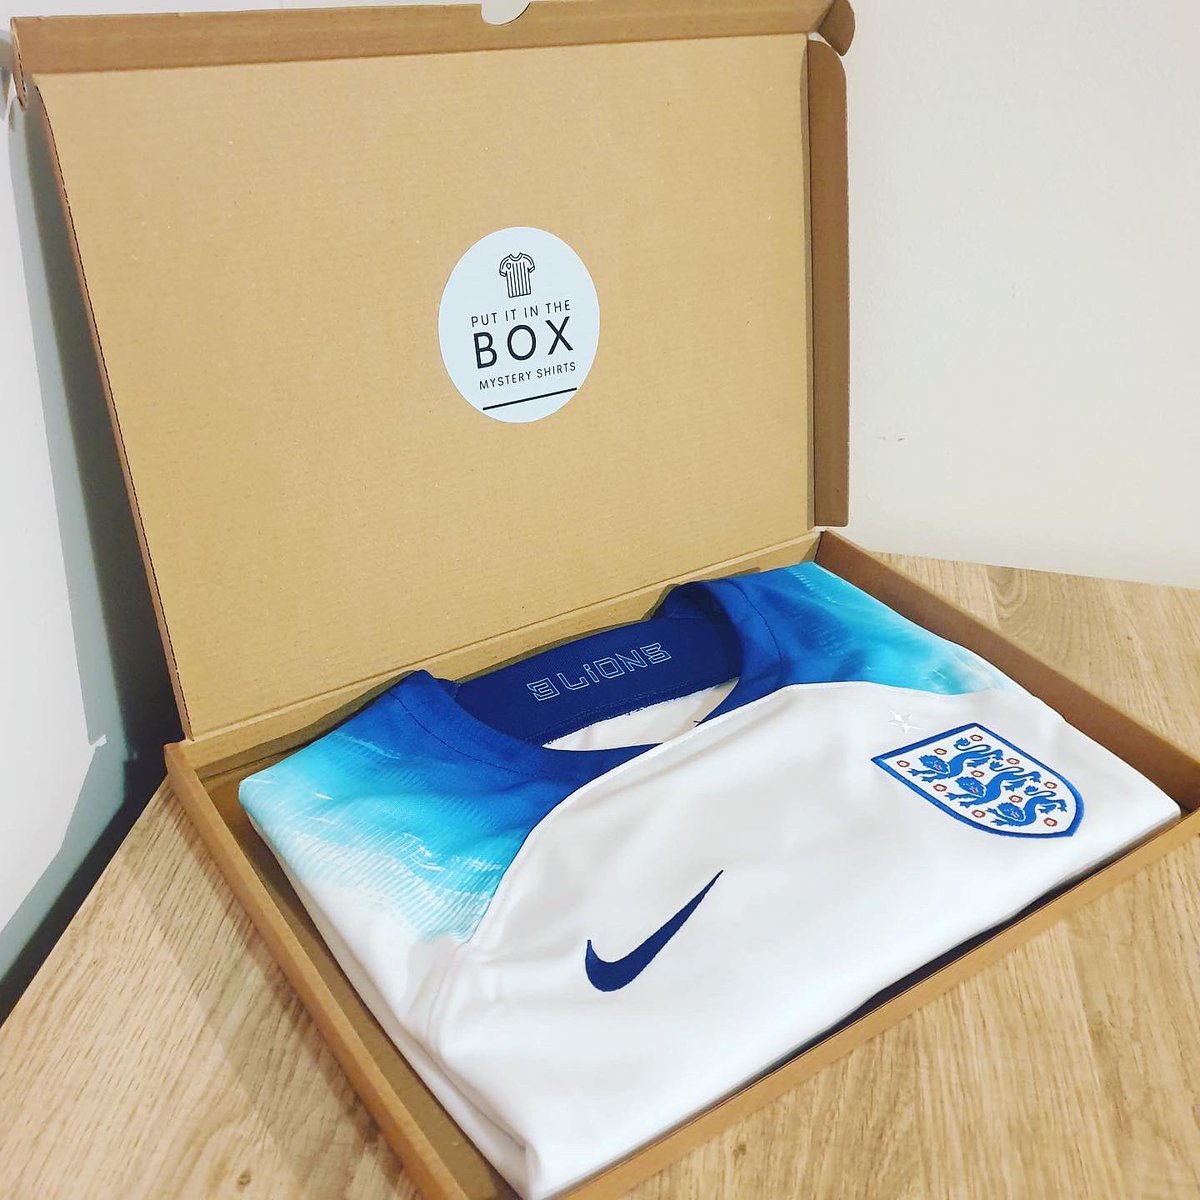 If Bukayo Saka scores against Ukraine today, we will give away a mystery football shirt box! 📦 To enter 👇 - Follow @putitinthebox_ - Like ❤️ - Retweet 🔄 Winner will be announced after the game ⚽️ #putitinthebox #mysteryshirt #mysteryfootballshirt #giveaway #Saka #England